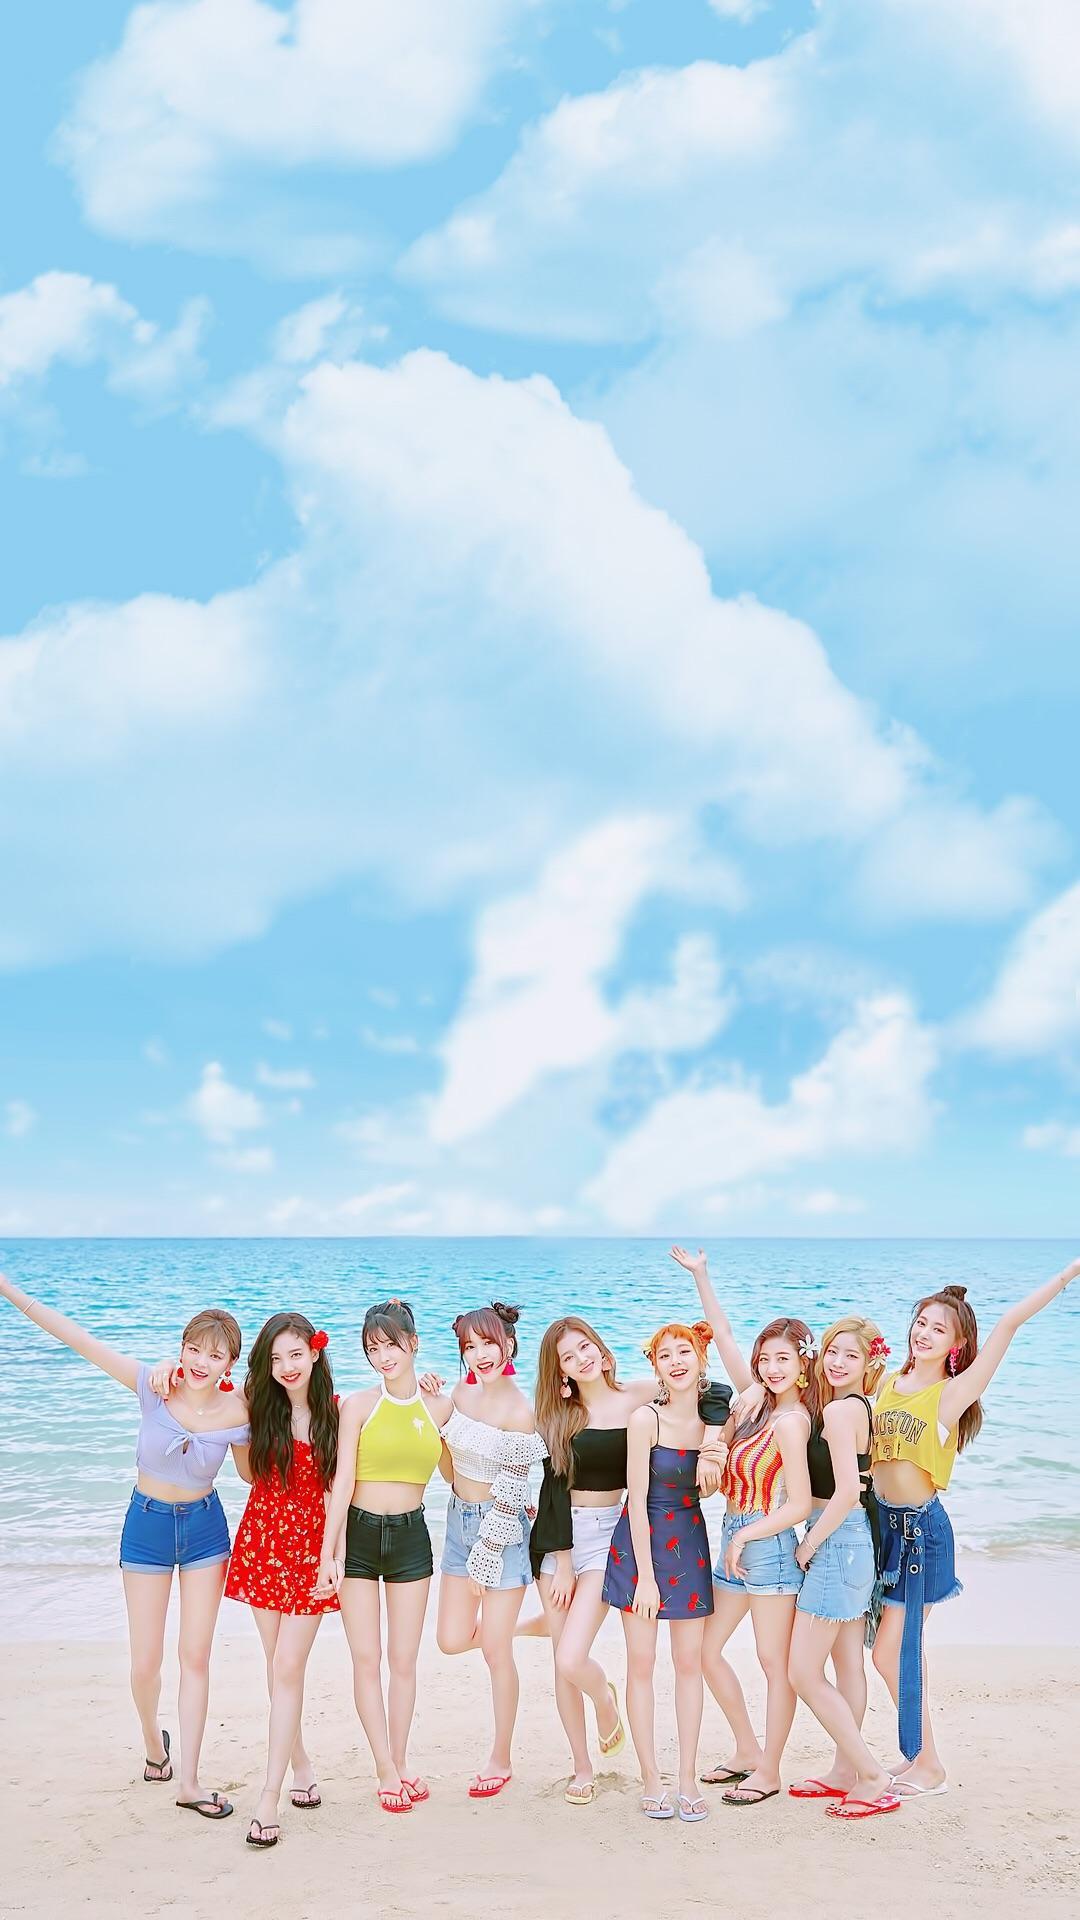 Twice I Can T Stop Me Wallpapers Top Free Twice I Can T Stop Me Backgrounds Wallpaperaccess Twice special ★since debut to dtna★(1hr stage compilation). twice i can t stop me wallpapers top